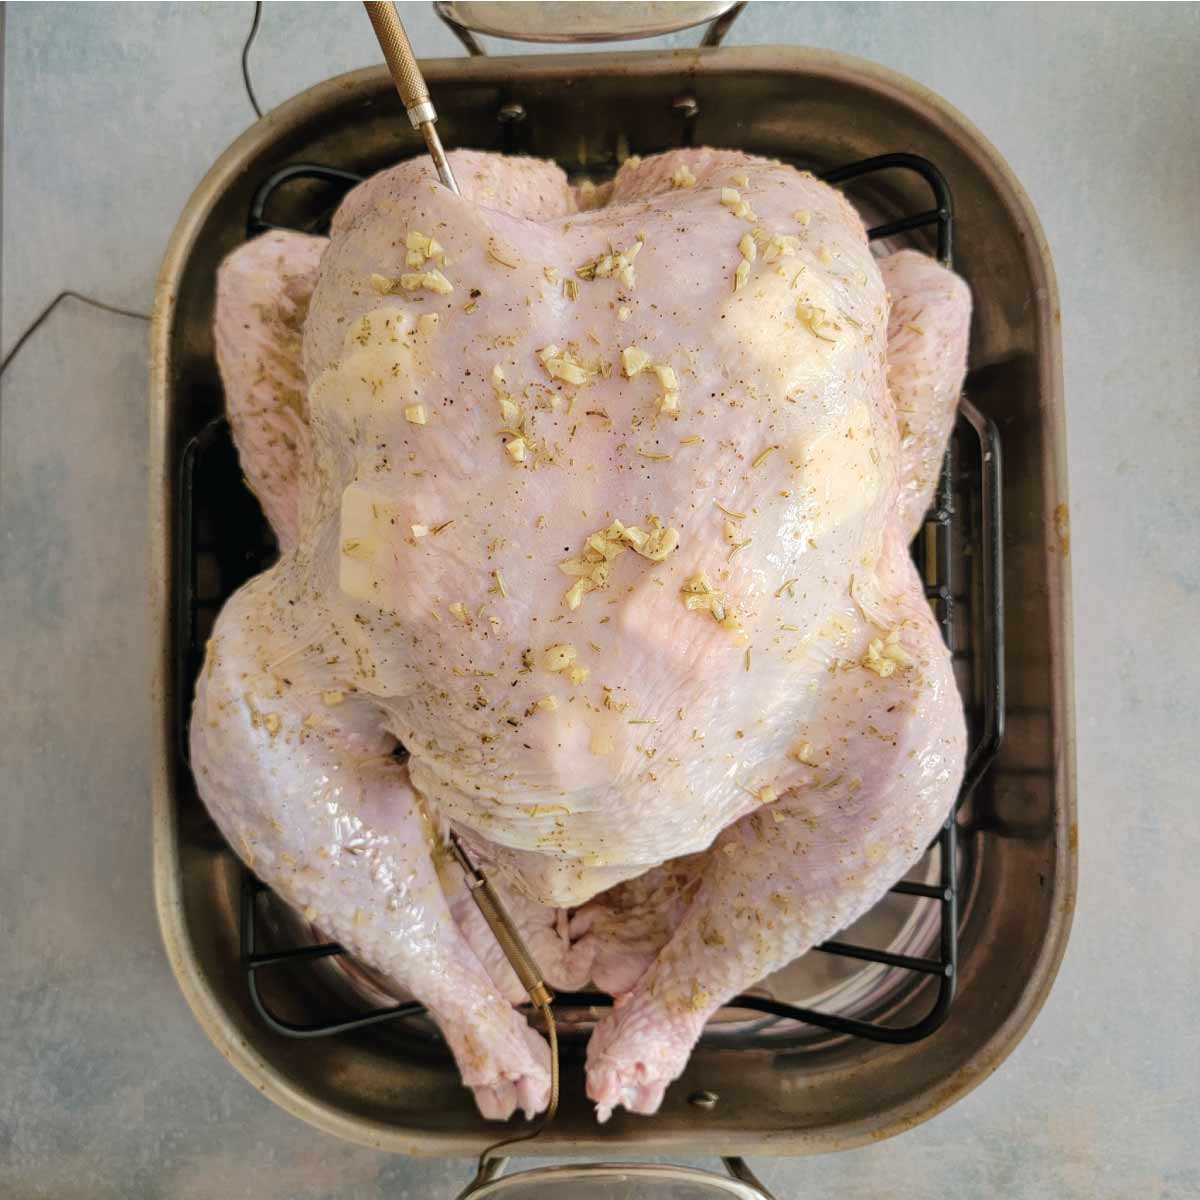 Turkey in a roasting pan with the seasoning all over and thermometer probes in the thigh and breast ready to bake.